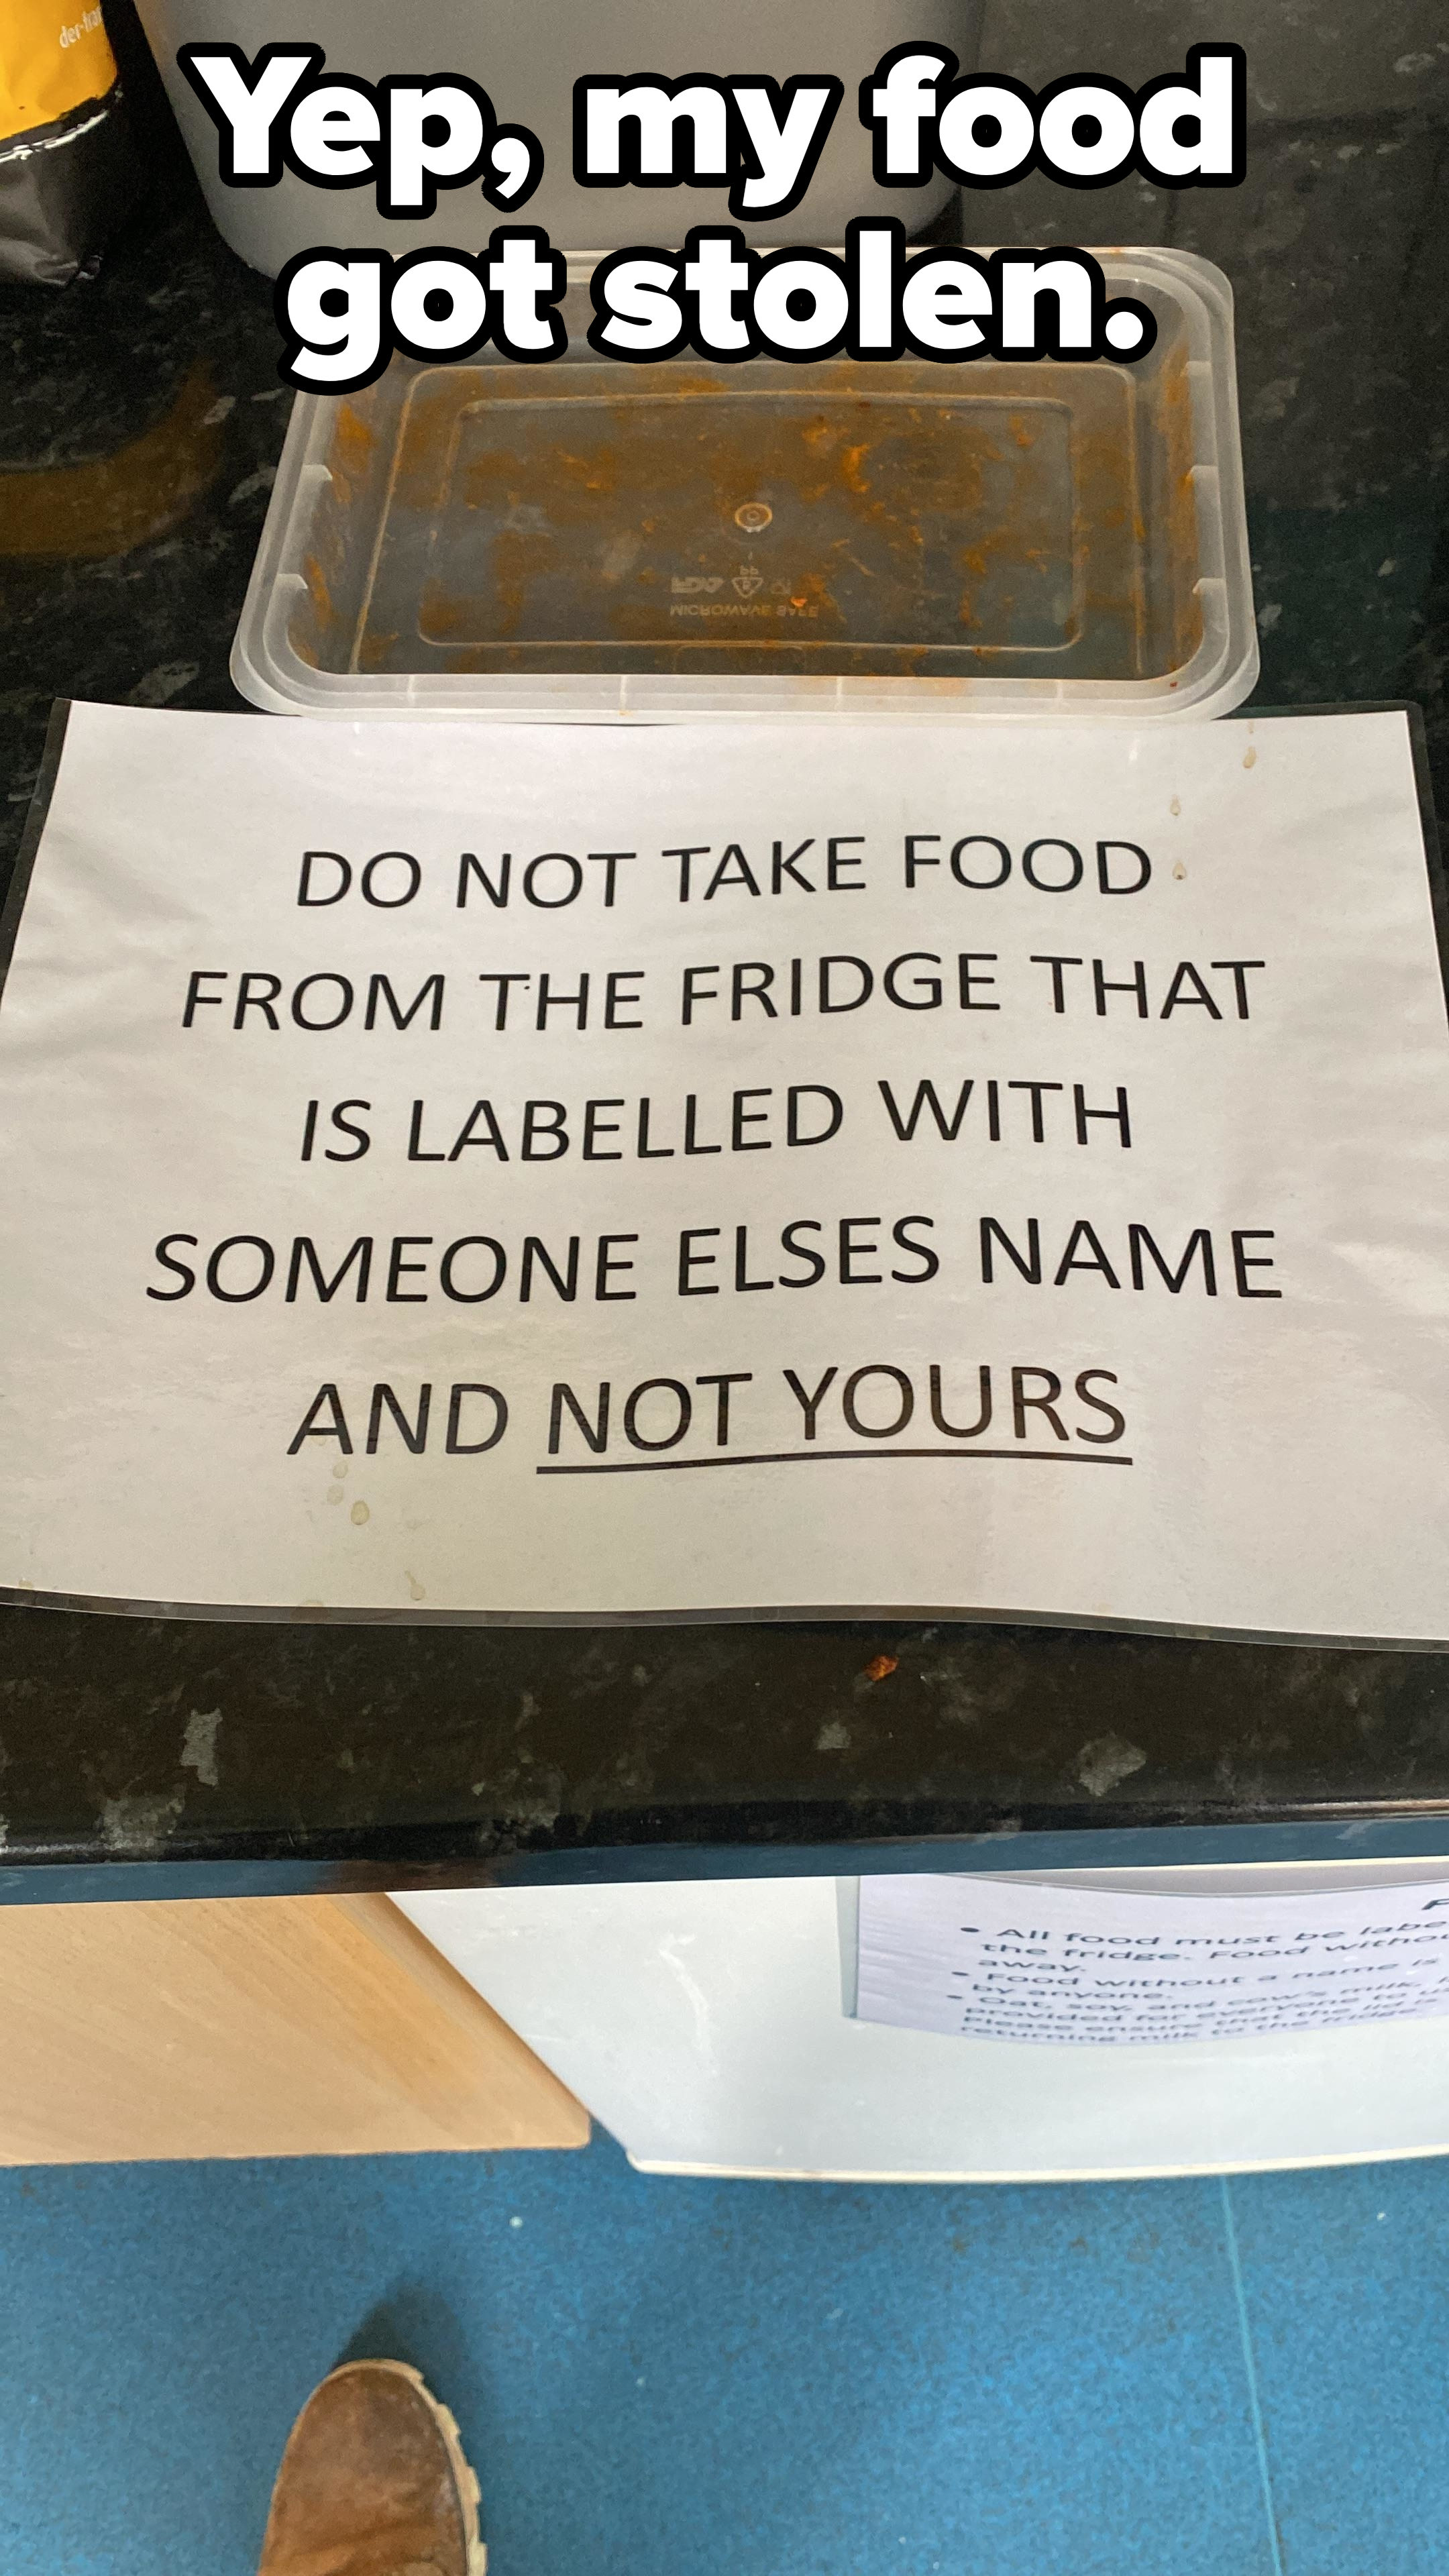 Sign in a fridge next to a plastic container top missing the bottom that reads, &quot;DO NOT TAKE FOOD FROM THE FRIDGE THAT IS LABELLED WITH SOMEONE ELSES NAME AND NOT YOURS&quot; with caption &quot;Yep, my food got stolen&quot;